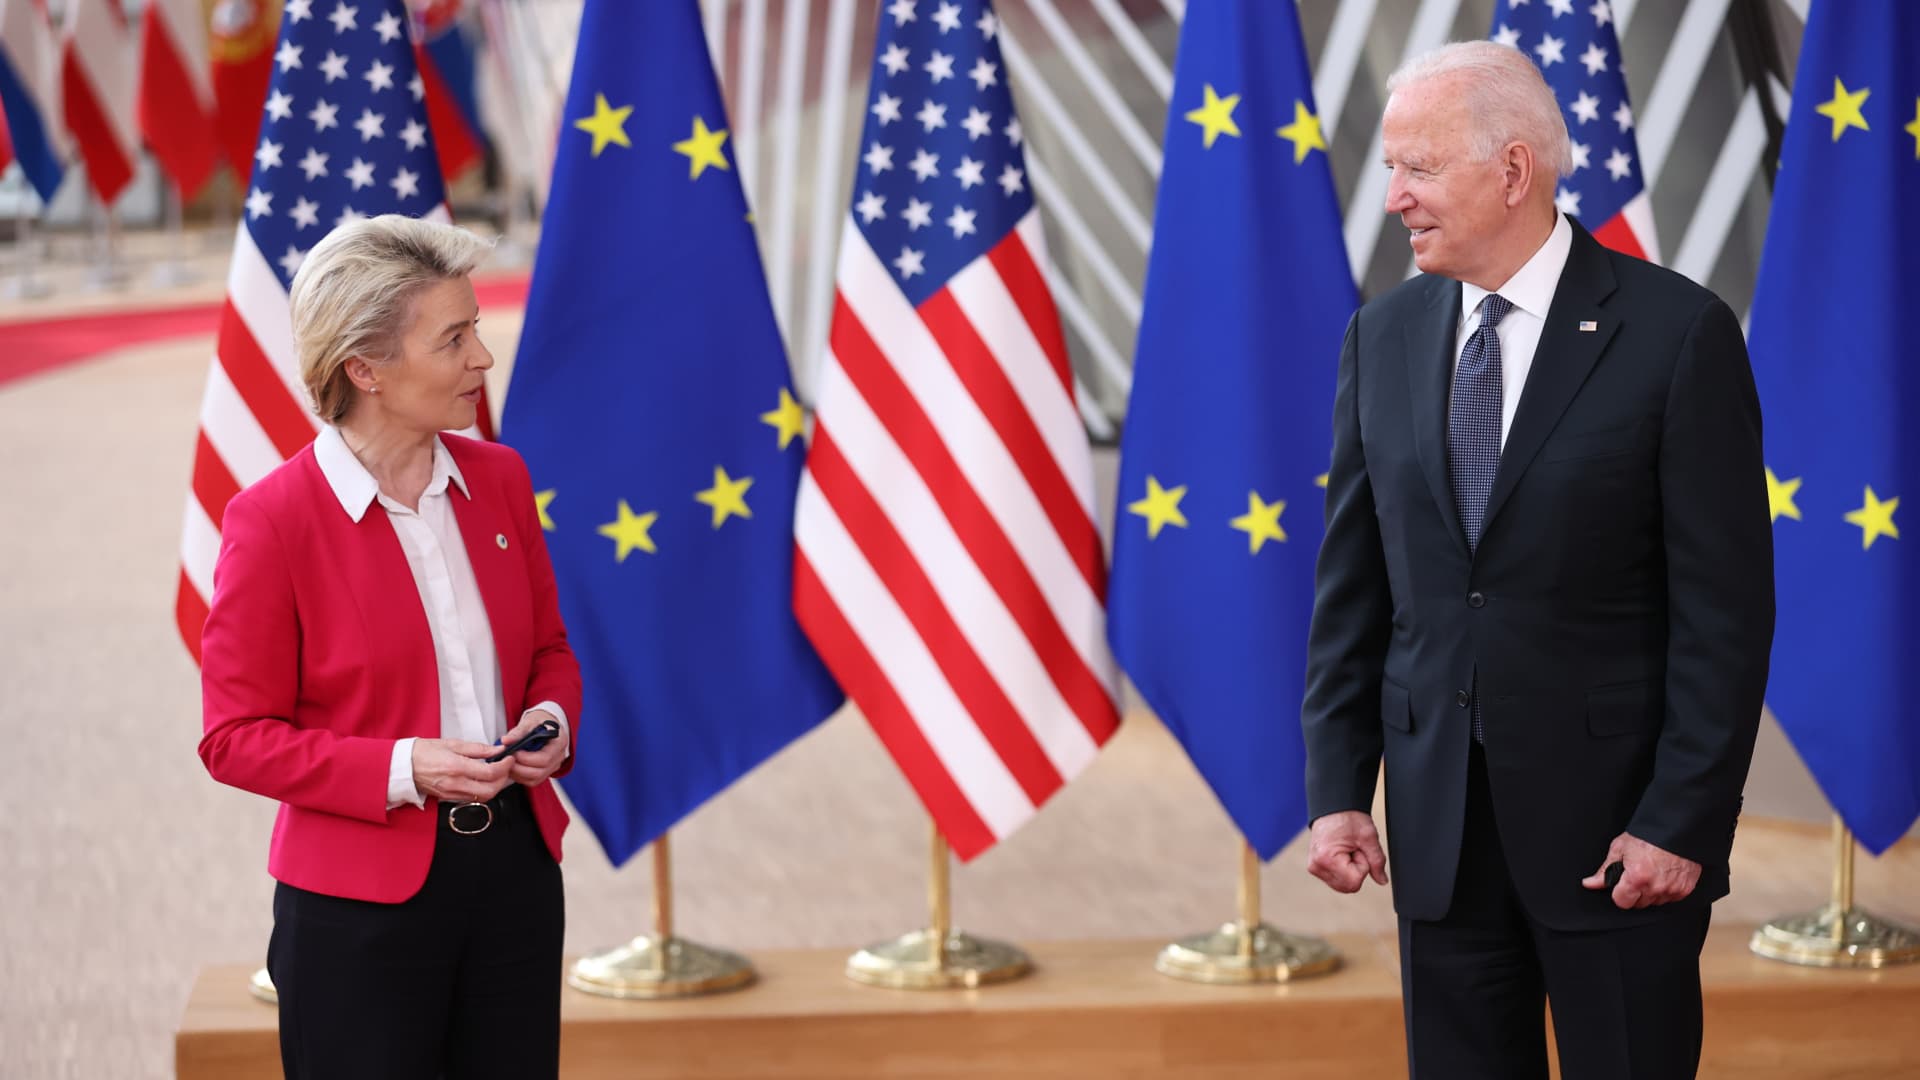 Biden signs executive order with new framework to protect data transfers between the U.S. and EU